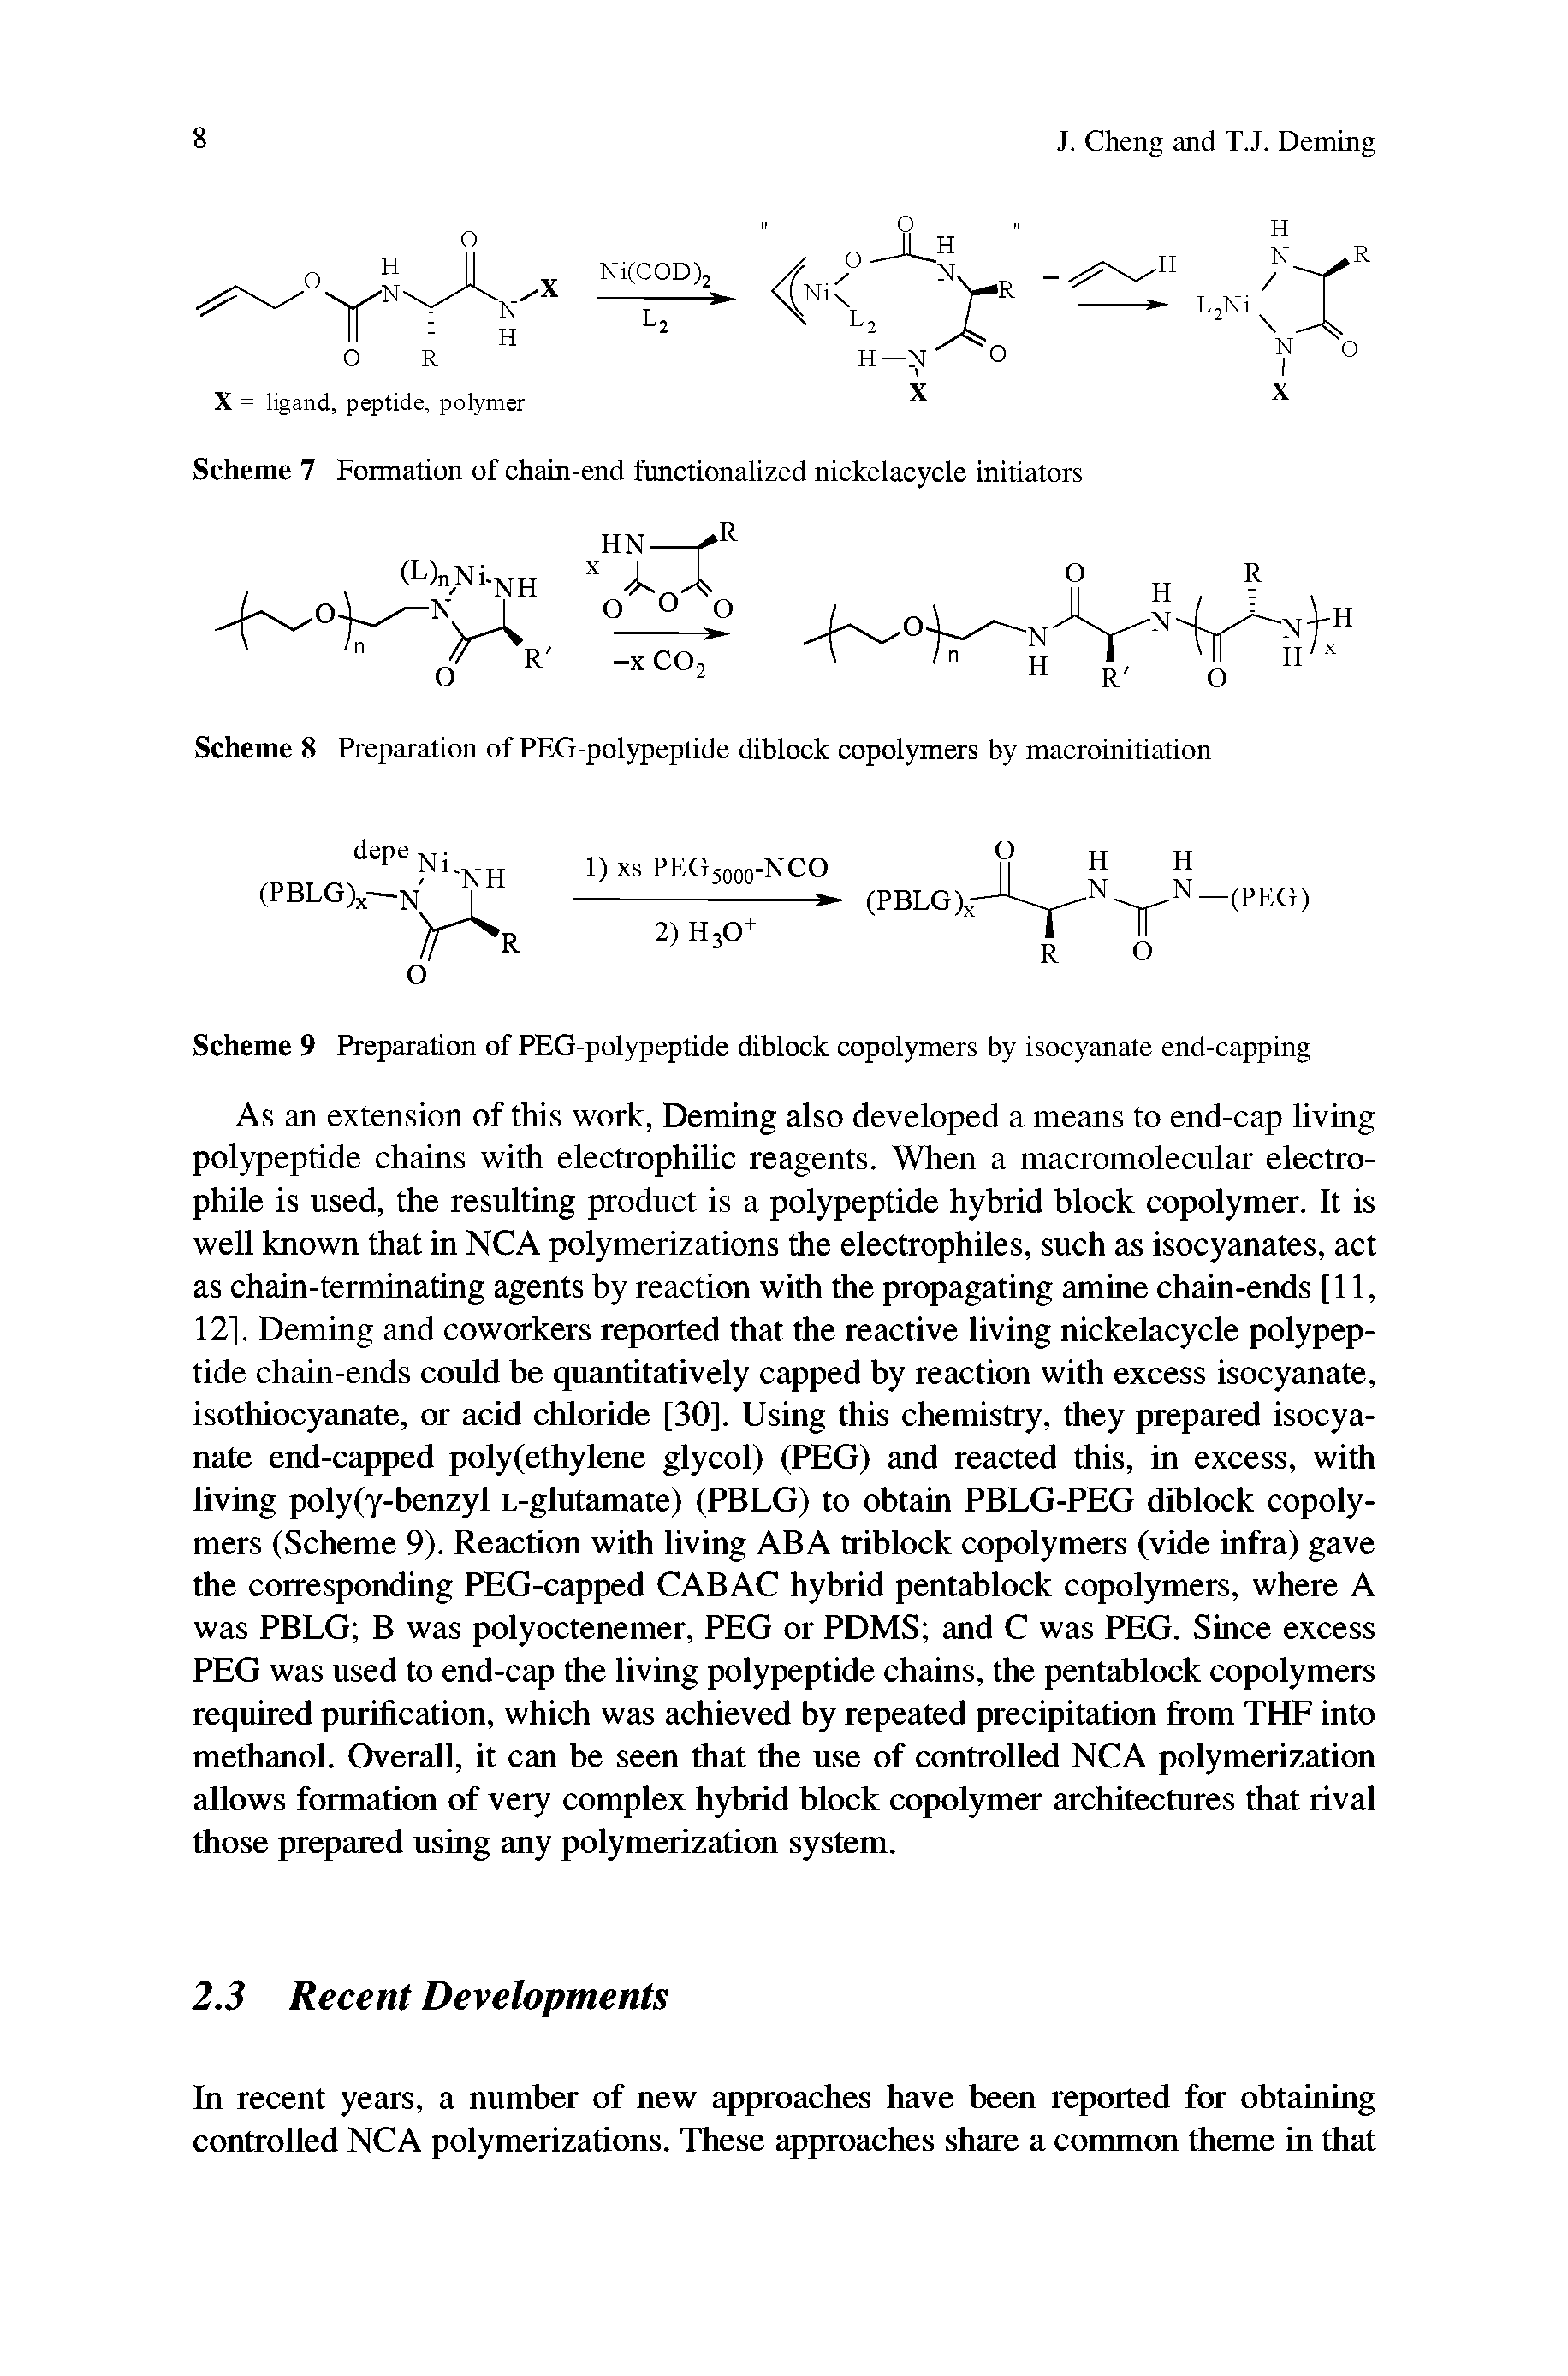 Scheme 7 Fomation of chain-end functionalized nickelacycle initiators...